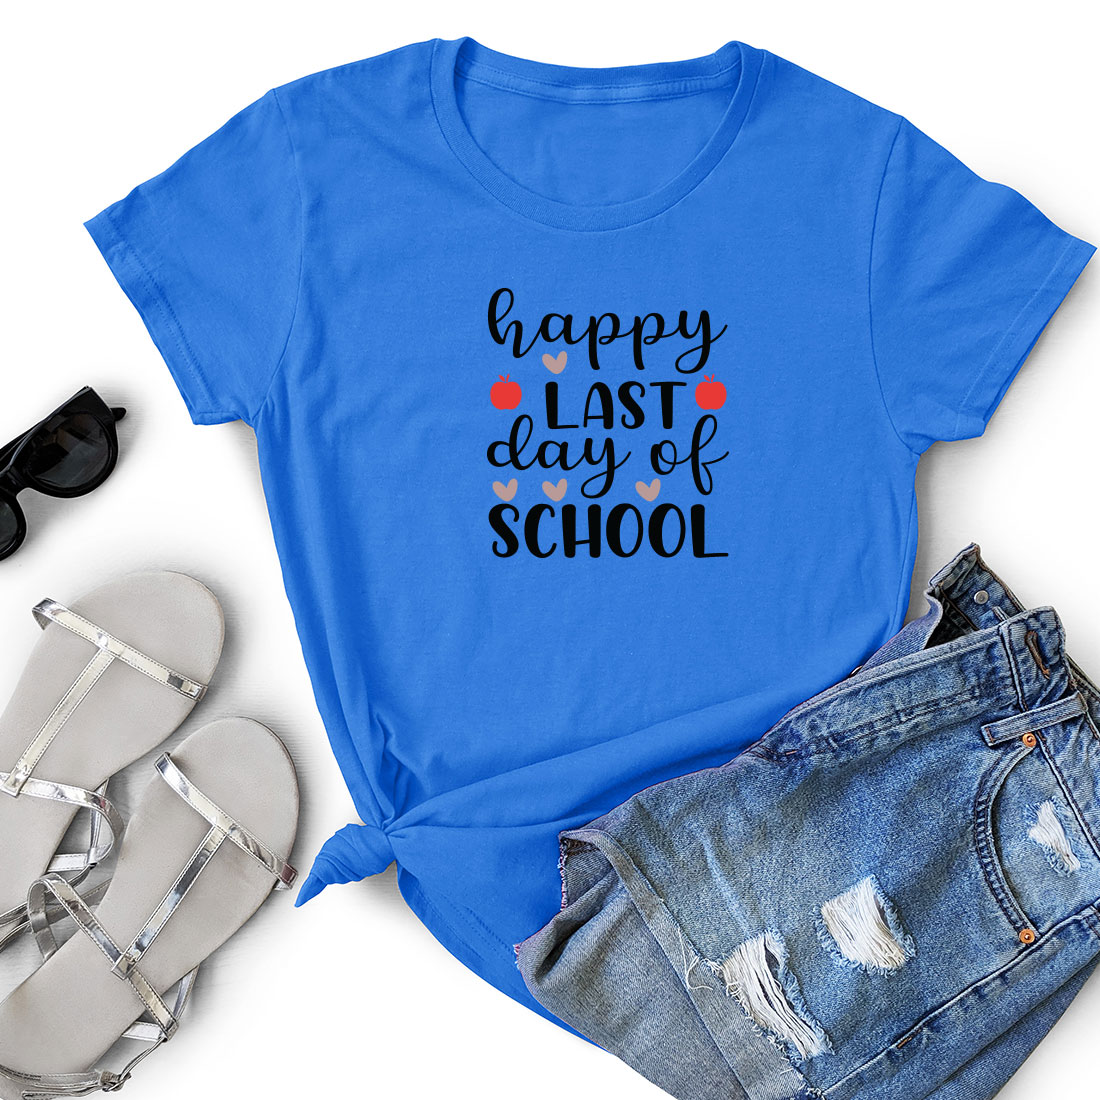 T - shirt that says happy last day of school next to a pair of.